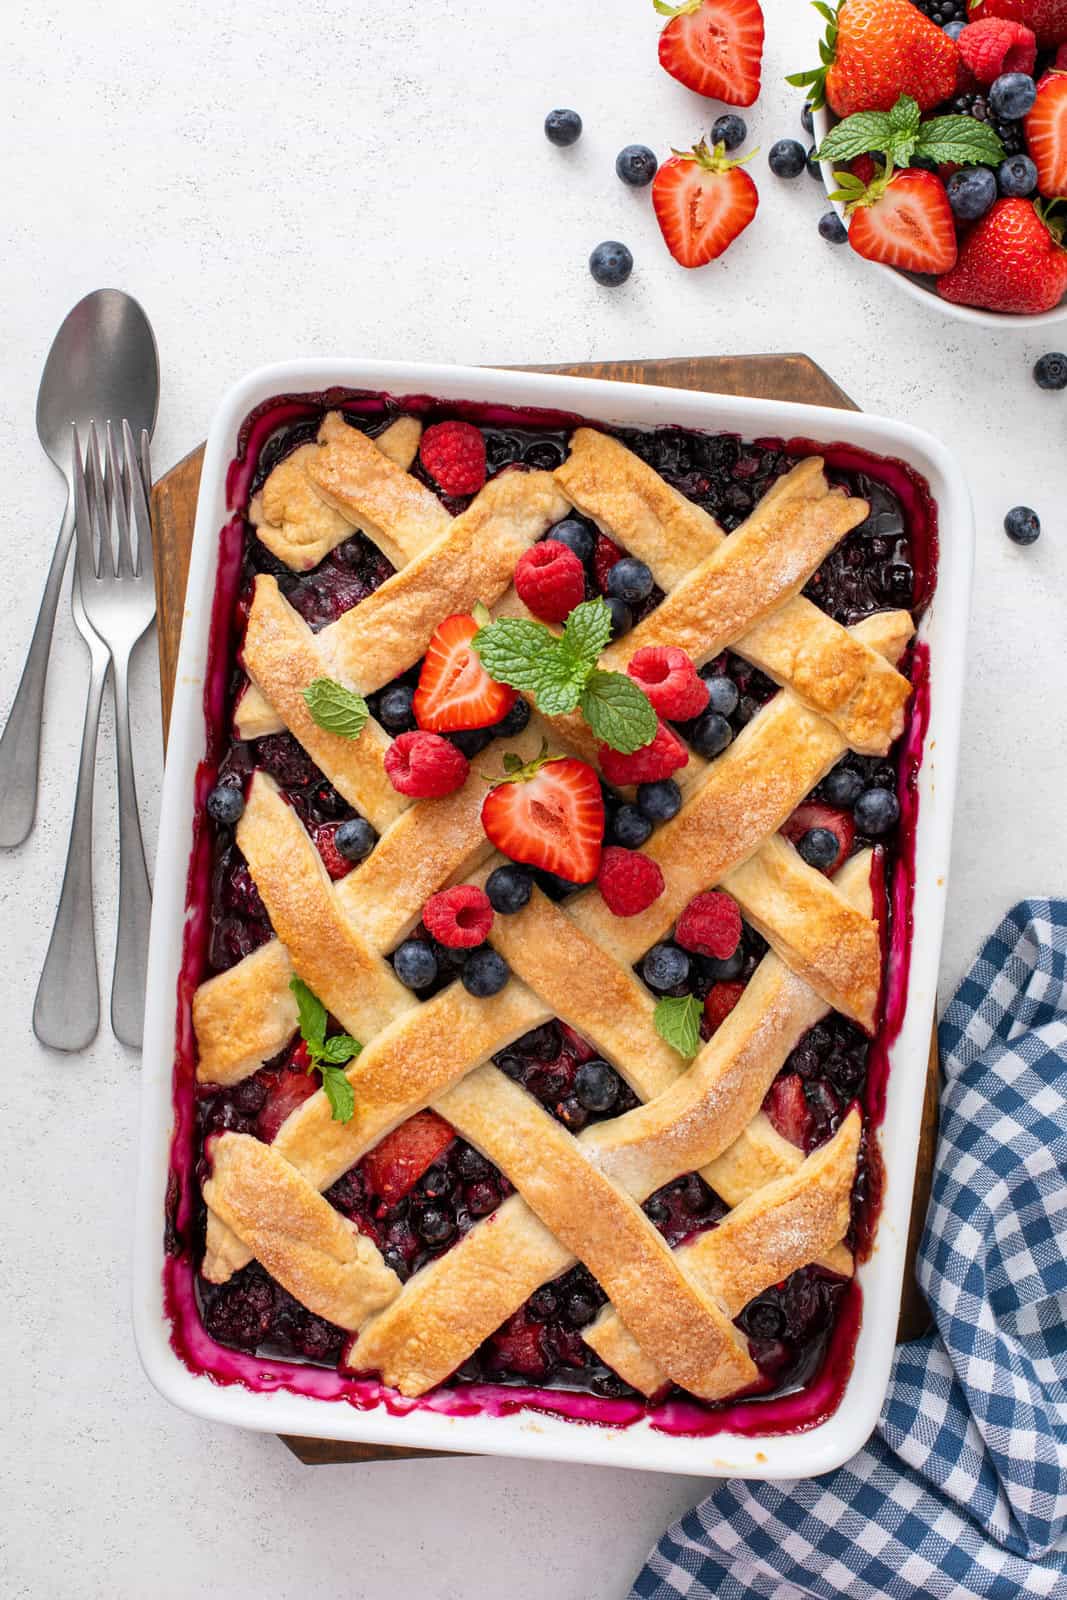 Overhead view of a pan of mixed berry cobbler topped with fresh berries.